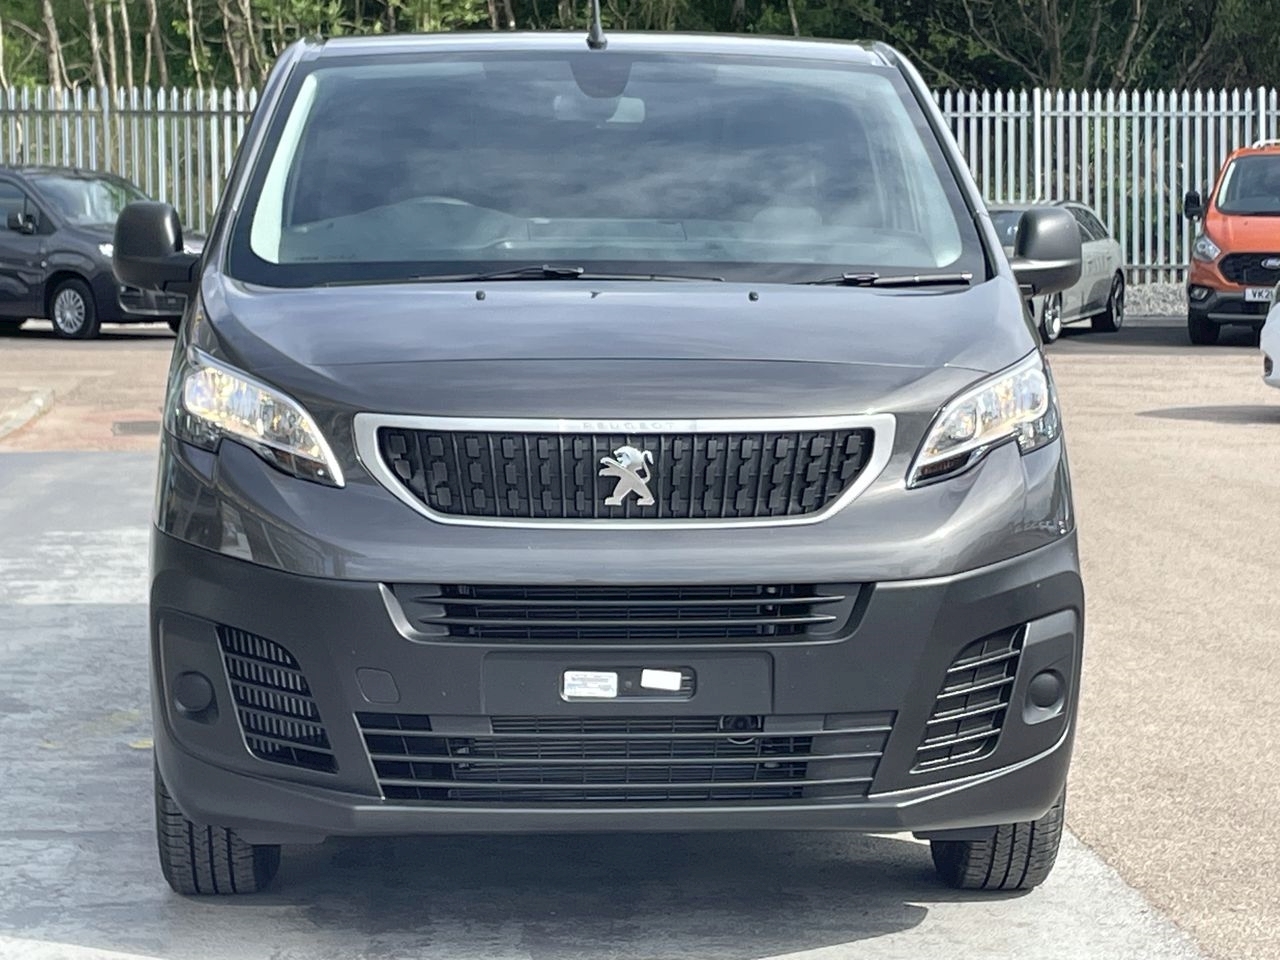 New 2021 Peugeot Expert HDI 100ps Professional Mwb with Air Con & Del ...